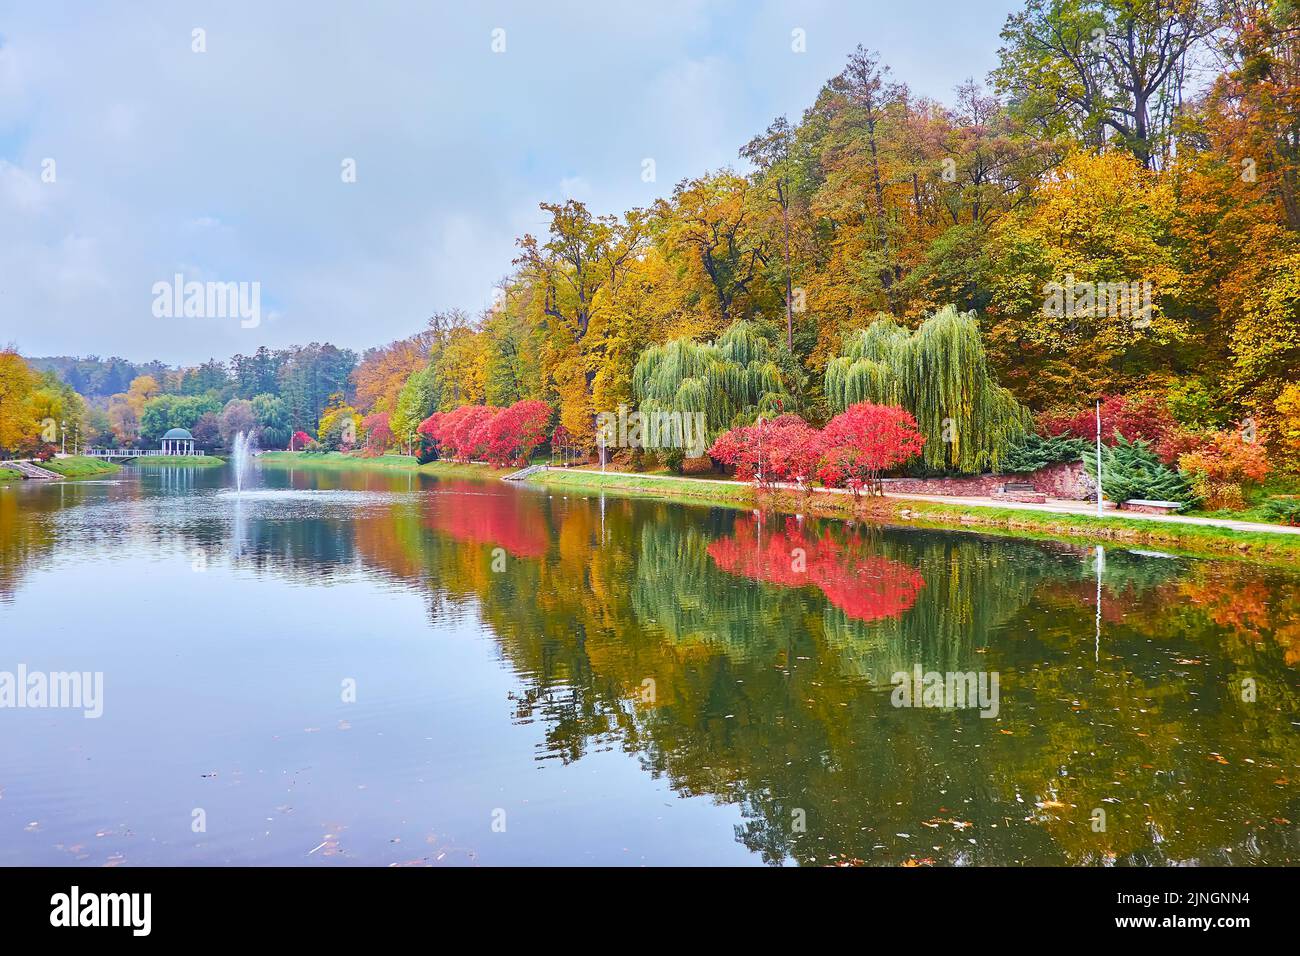 The bright red, yellow and green autumn trees on the bank of Palladin pond in Feofania park, Kyiv, Ukraine Stock Photo